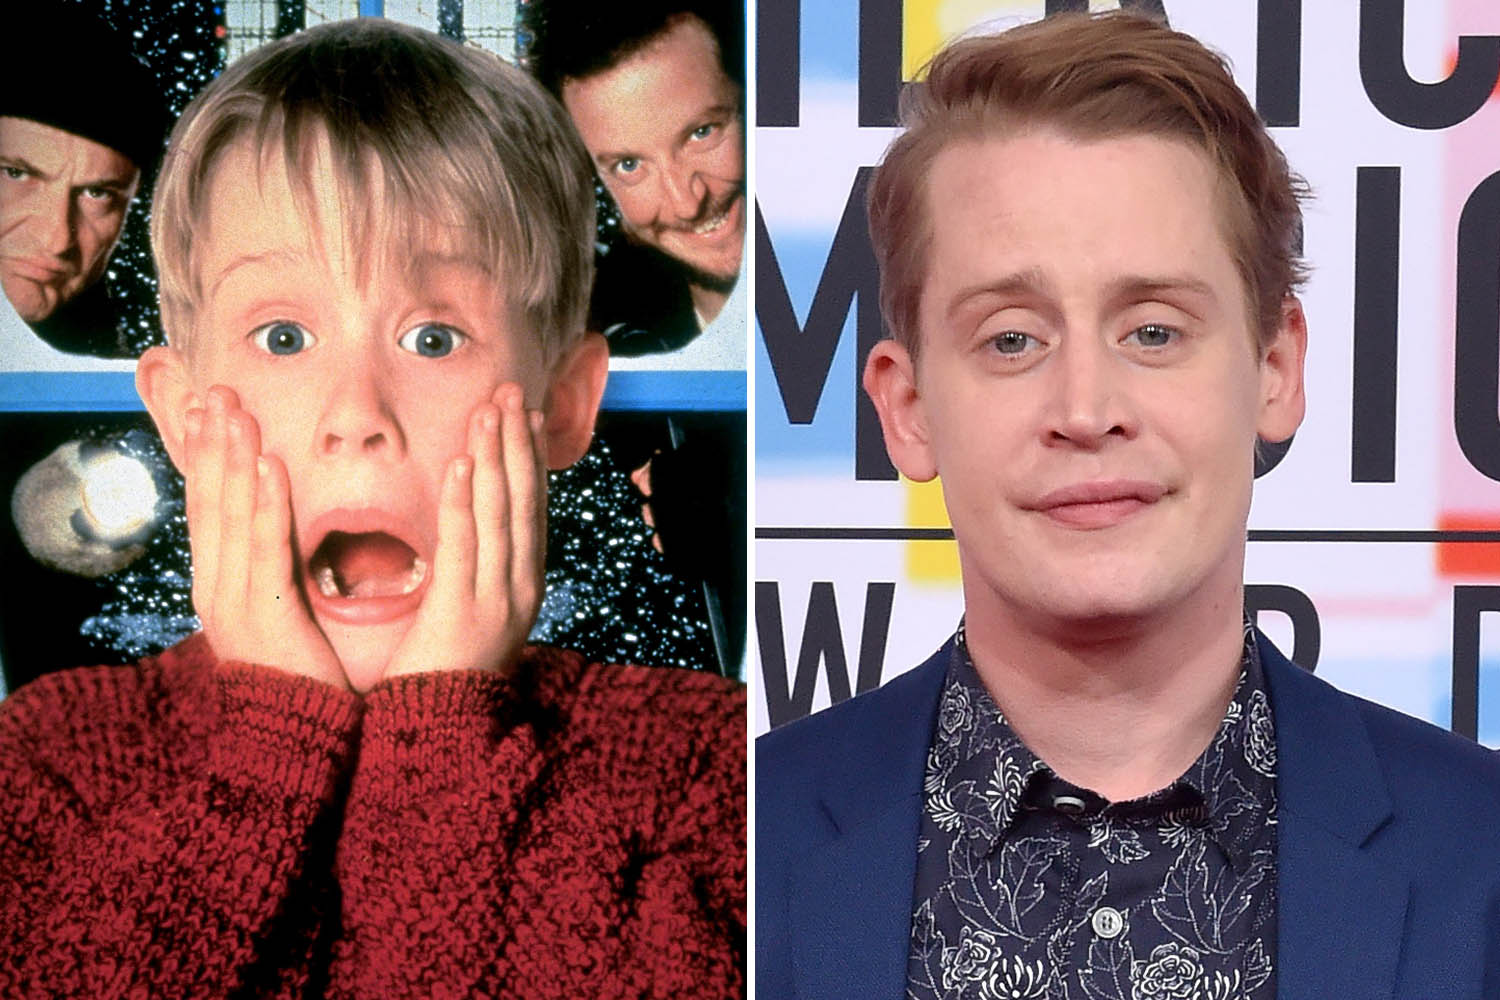 Macaulay Culkin became a household name after the film's released